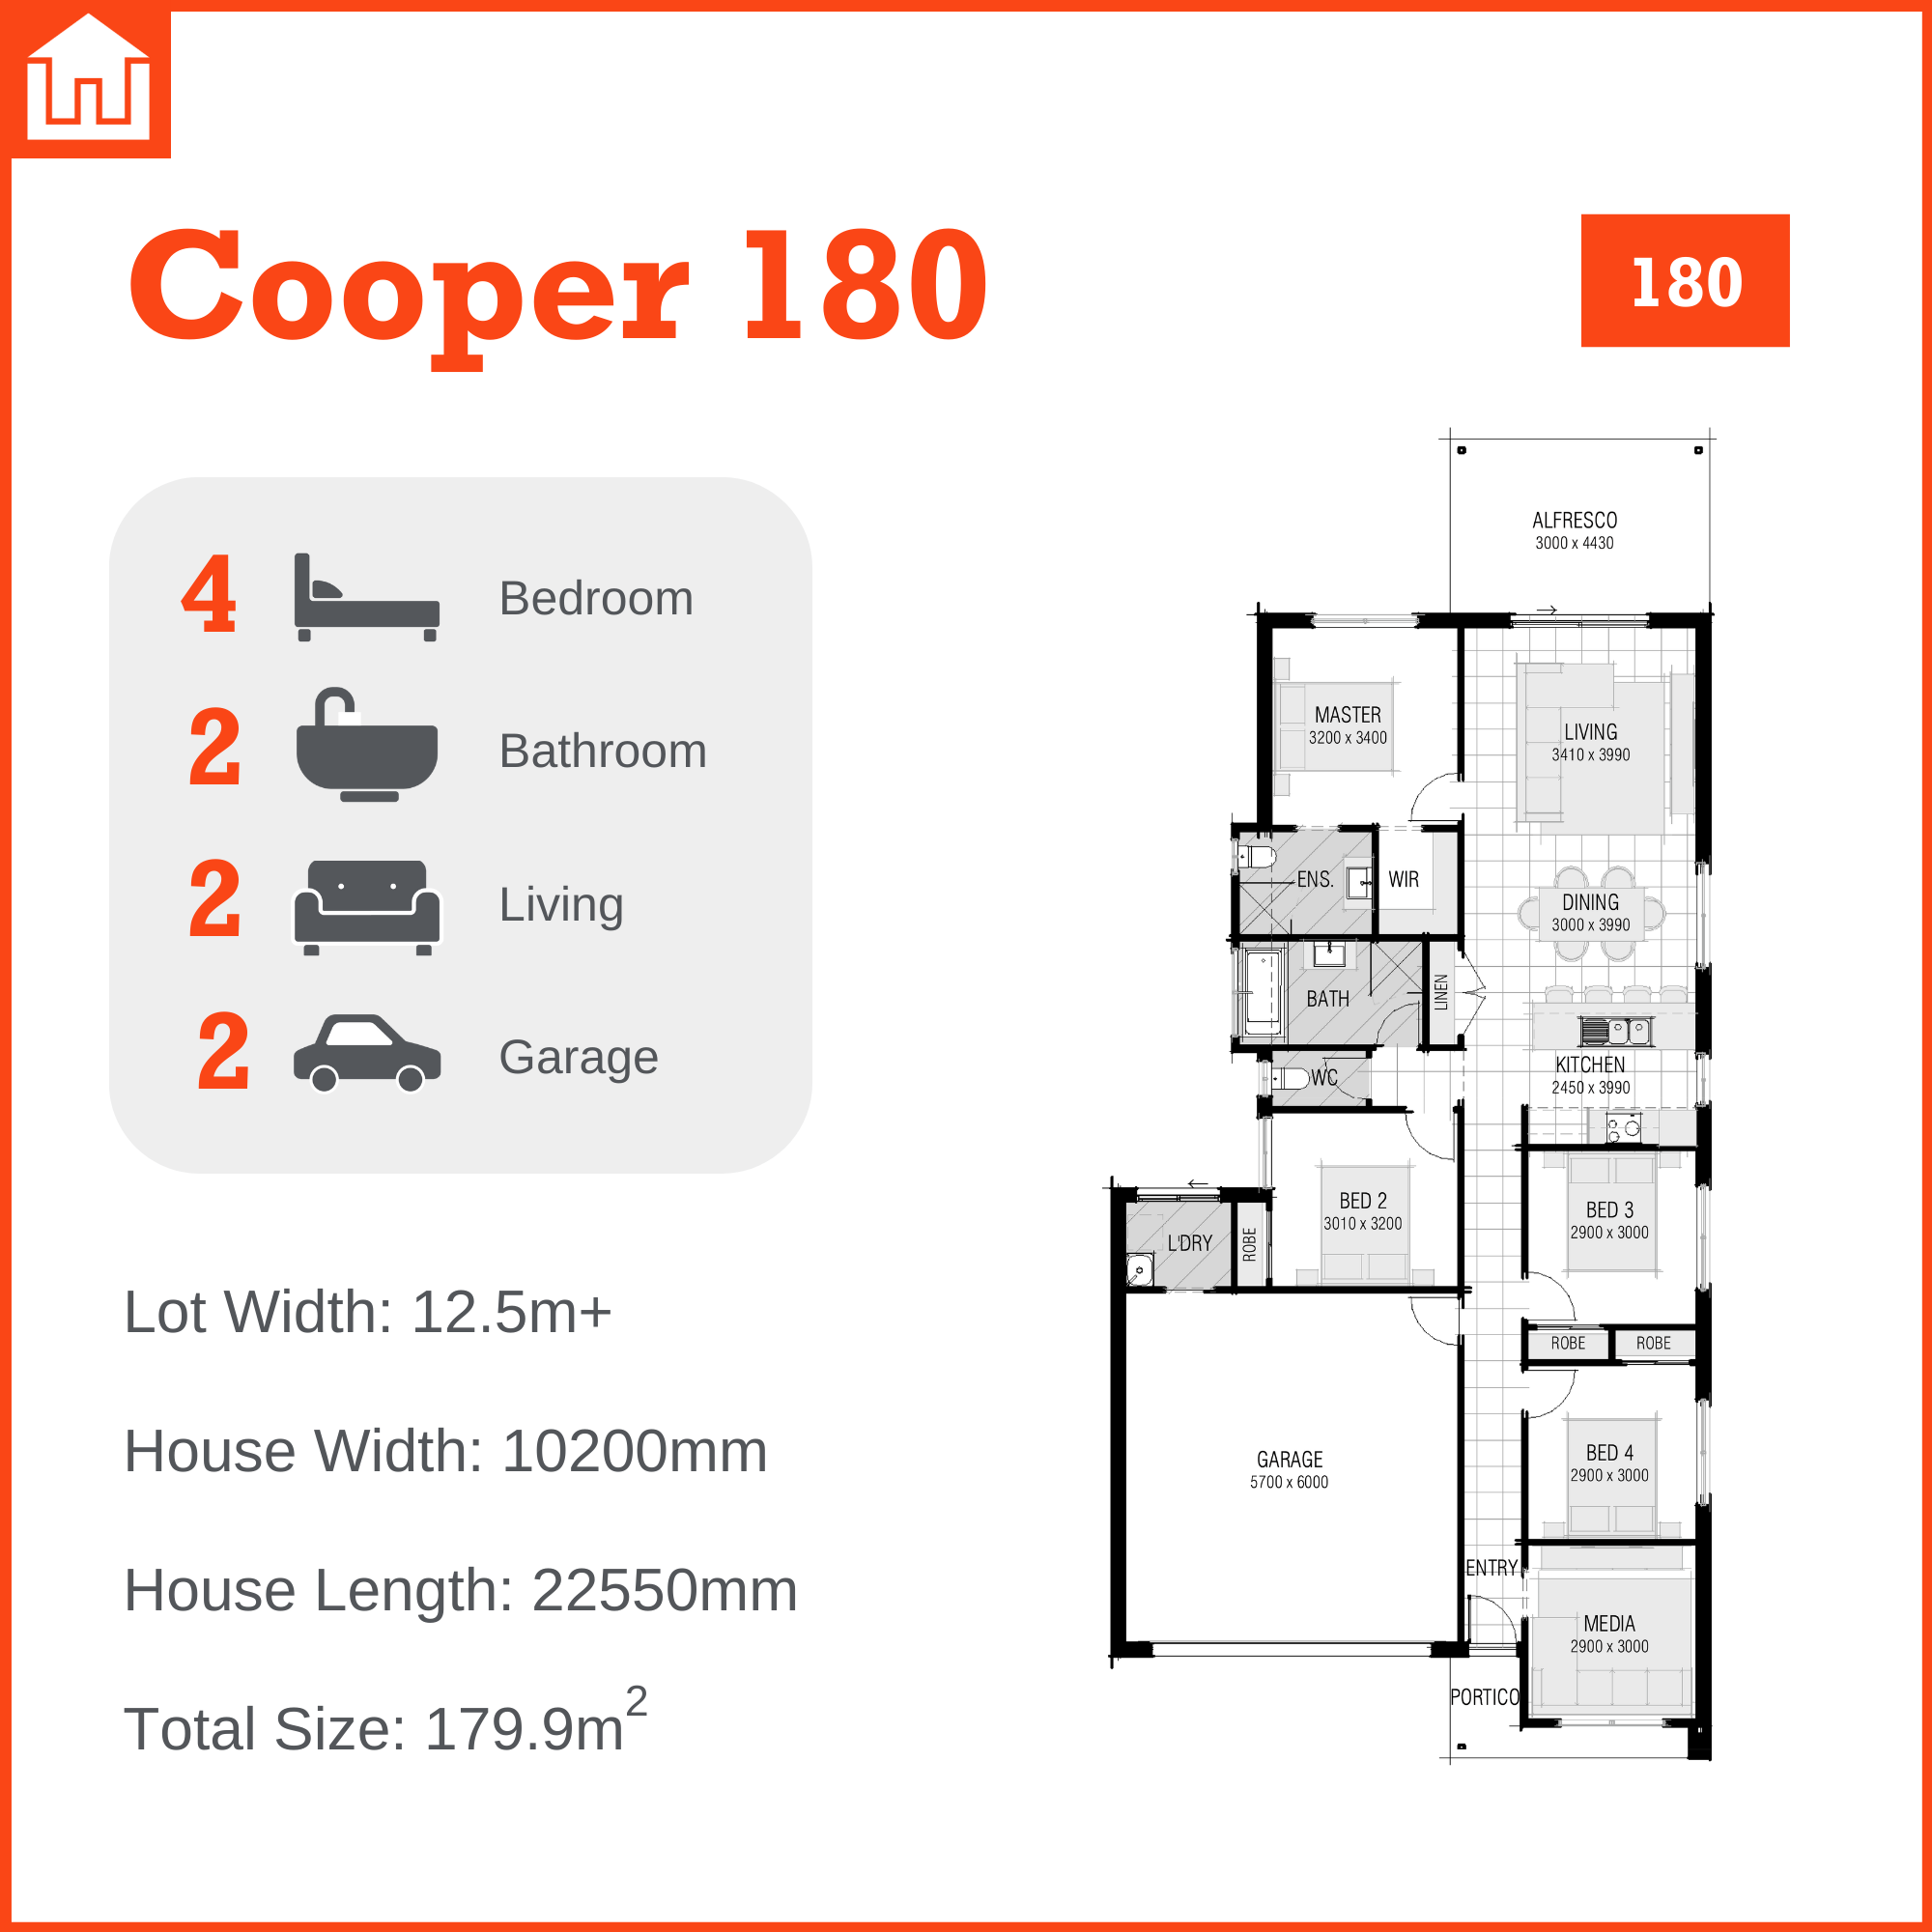 Cooper 180 Home Design - Expression by DC Living 